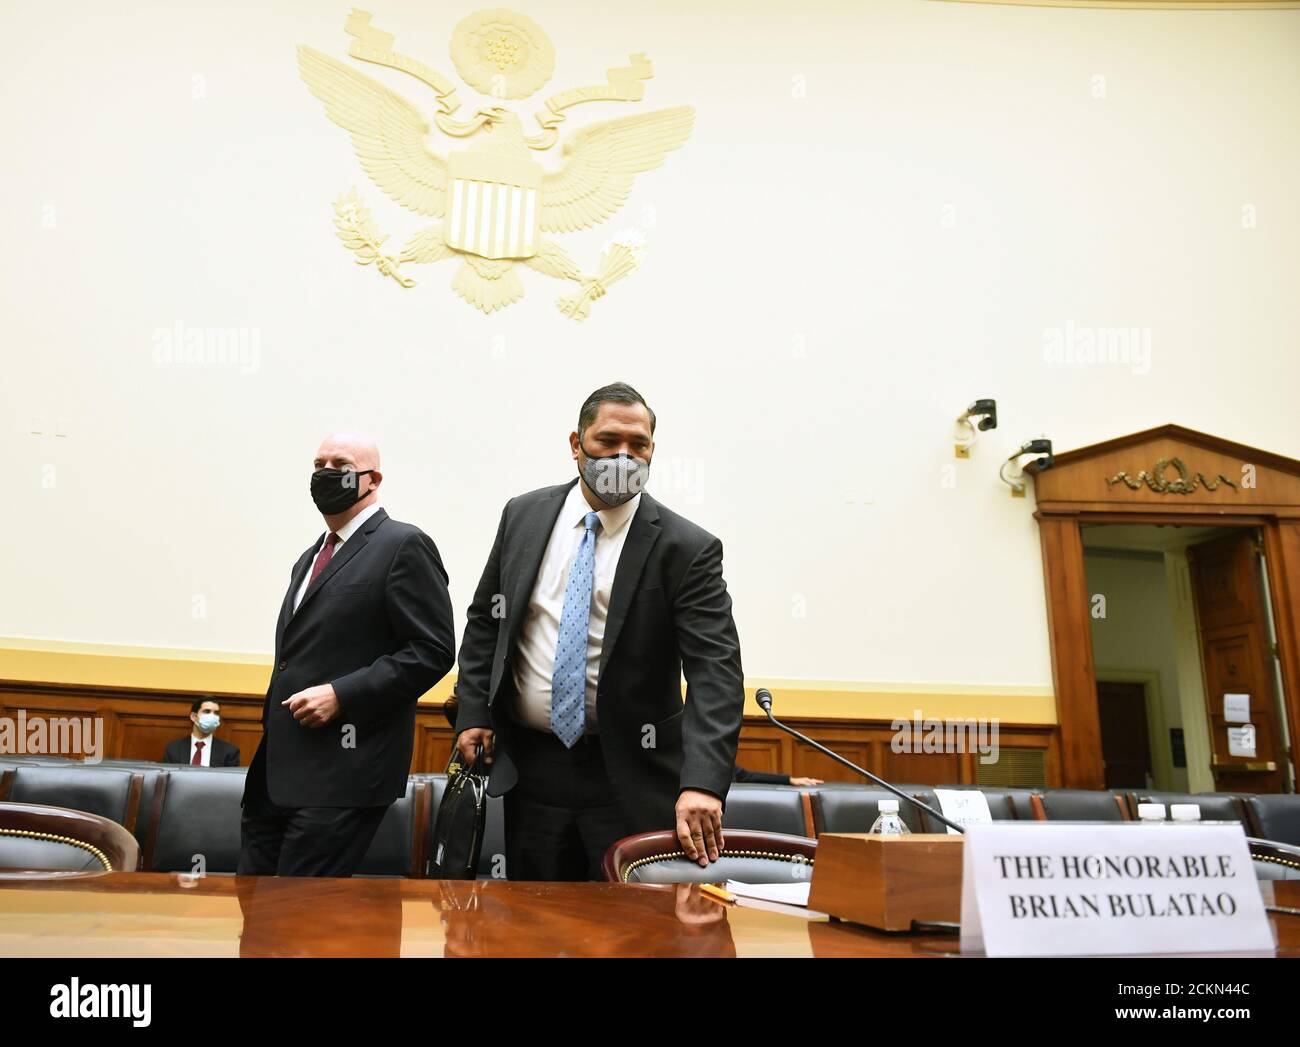 Washington, United States. 16th Sep, 2020. Brian Bulatao (C), Under Secretary of State for Management and R. Clarke Cooper (R), Assistant Secretary of State for Political-Military Affairs, prepare to testify before a House Committee on Foreign Affairs hearing looking into the firing of State Department Inspector General Steven Linick, on Capitol Hill in Washington, DC on Wednesday, September 16, 2020. Photo by Kevin Dietsch/UPI Credit: UPI/Alamy Live News Stock Photo